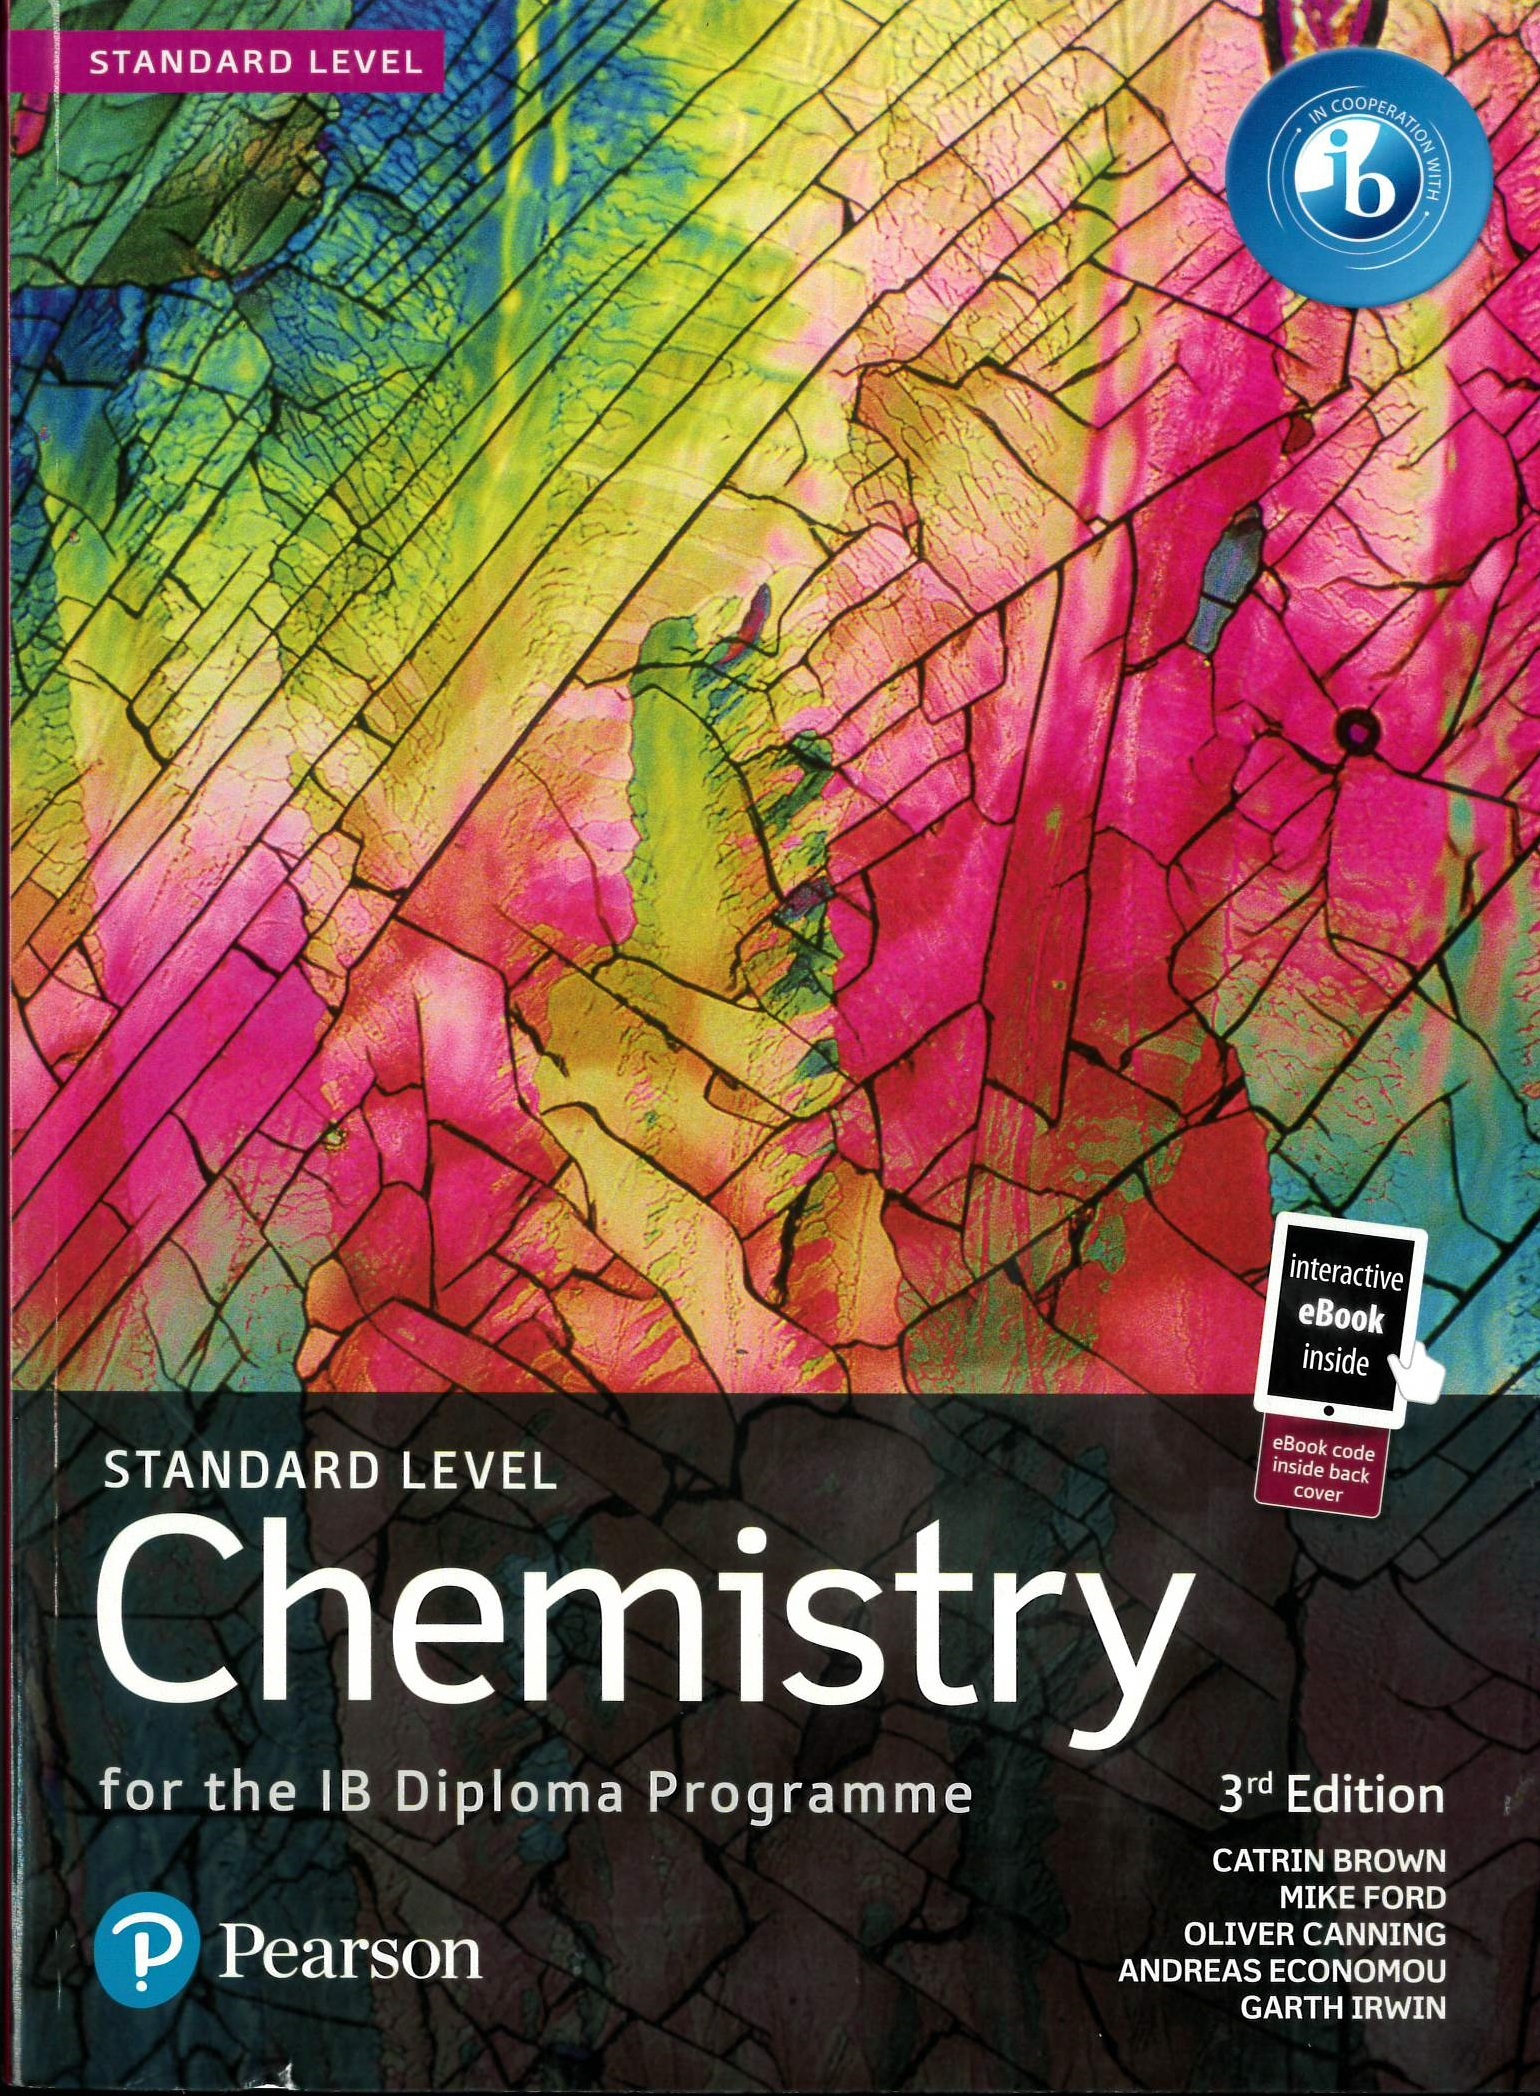 Chemistry [standard level] : for the IB diploma programme